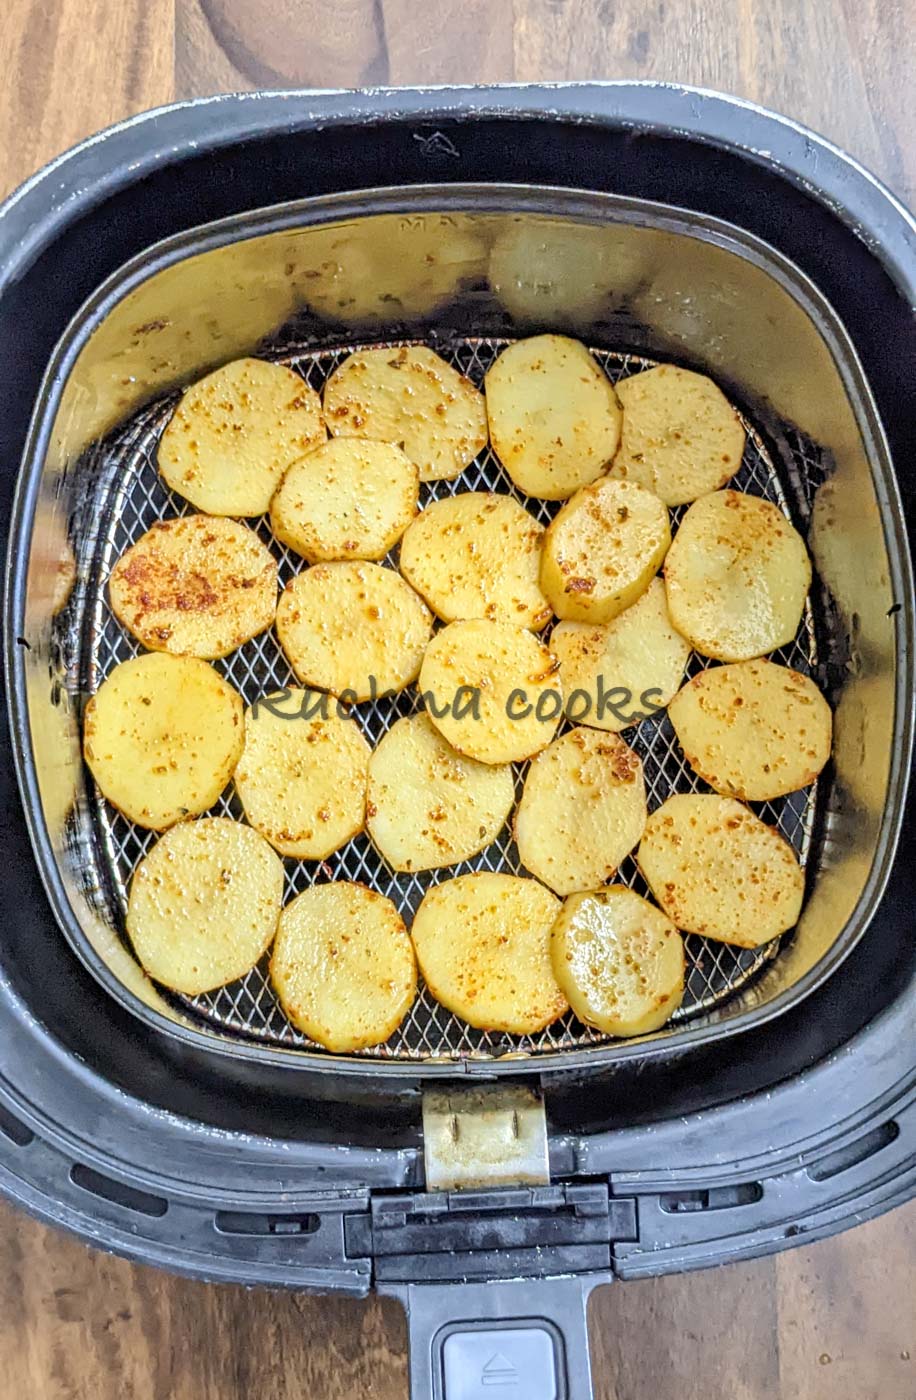 Potato slices in air fryer basket for cooking.